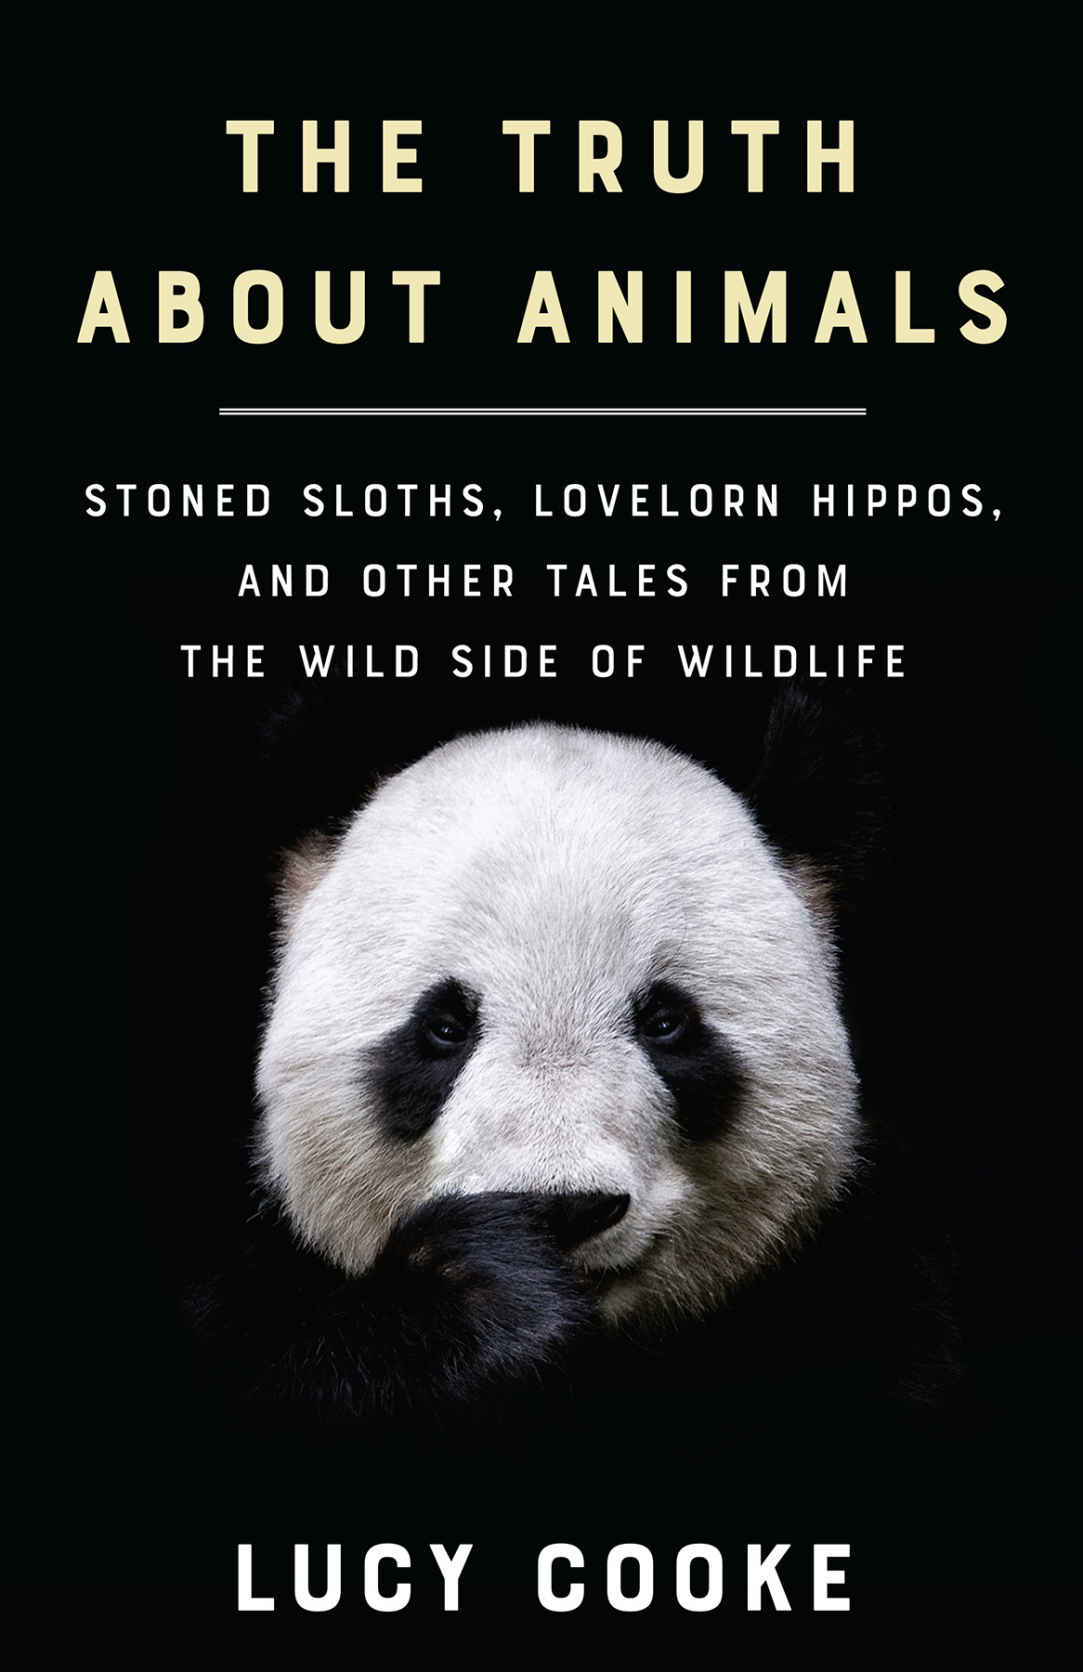 The Truth About Animals: Stoned Sloths, Lovelorn Hippos, and Other Tales From the Wild Side of Wildlife